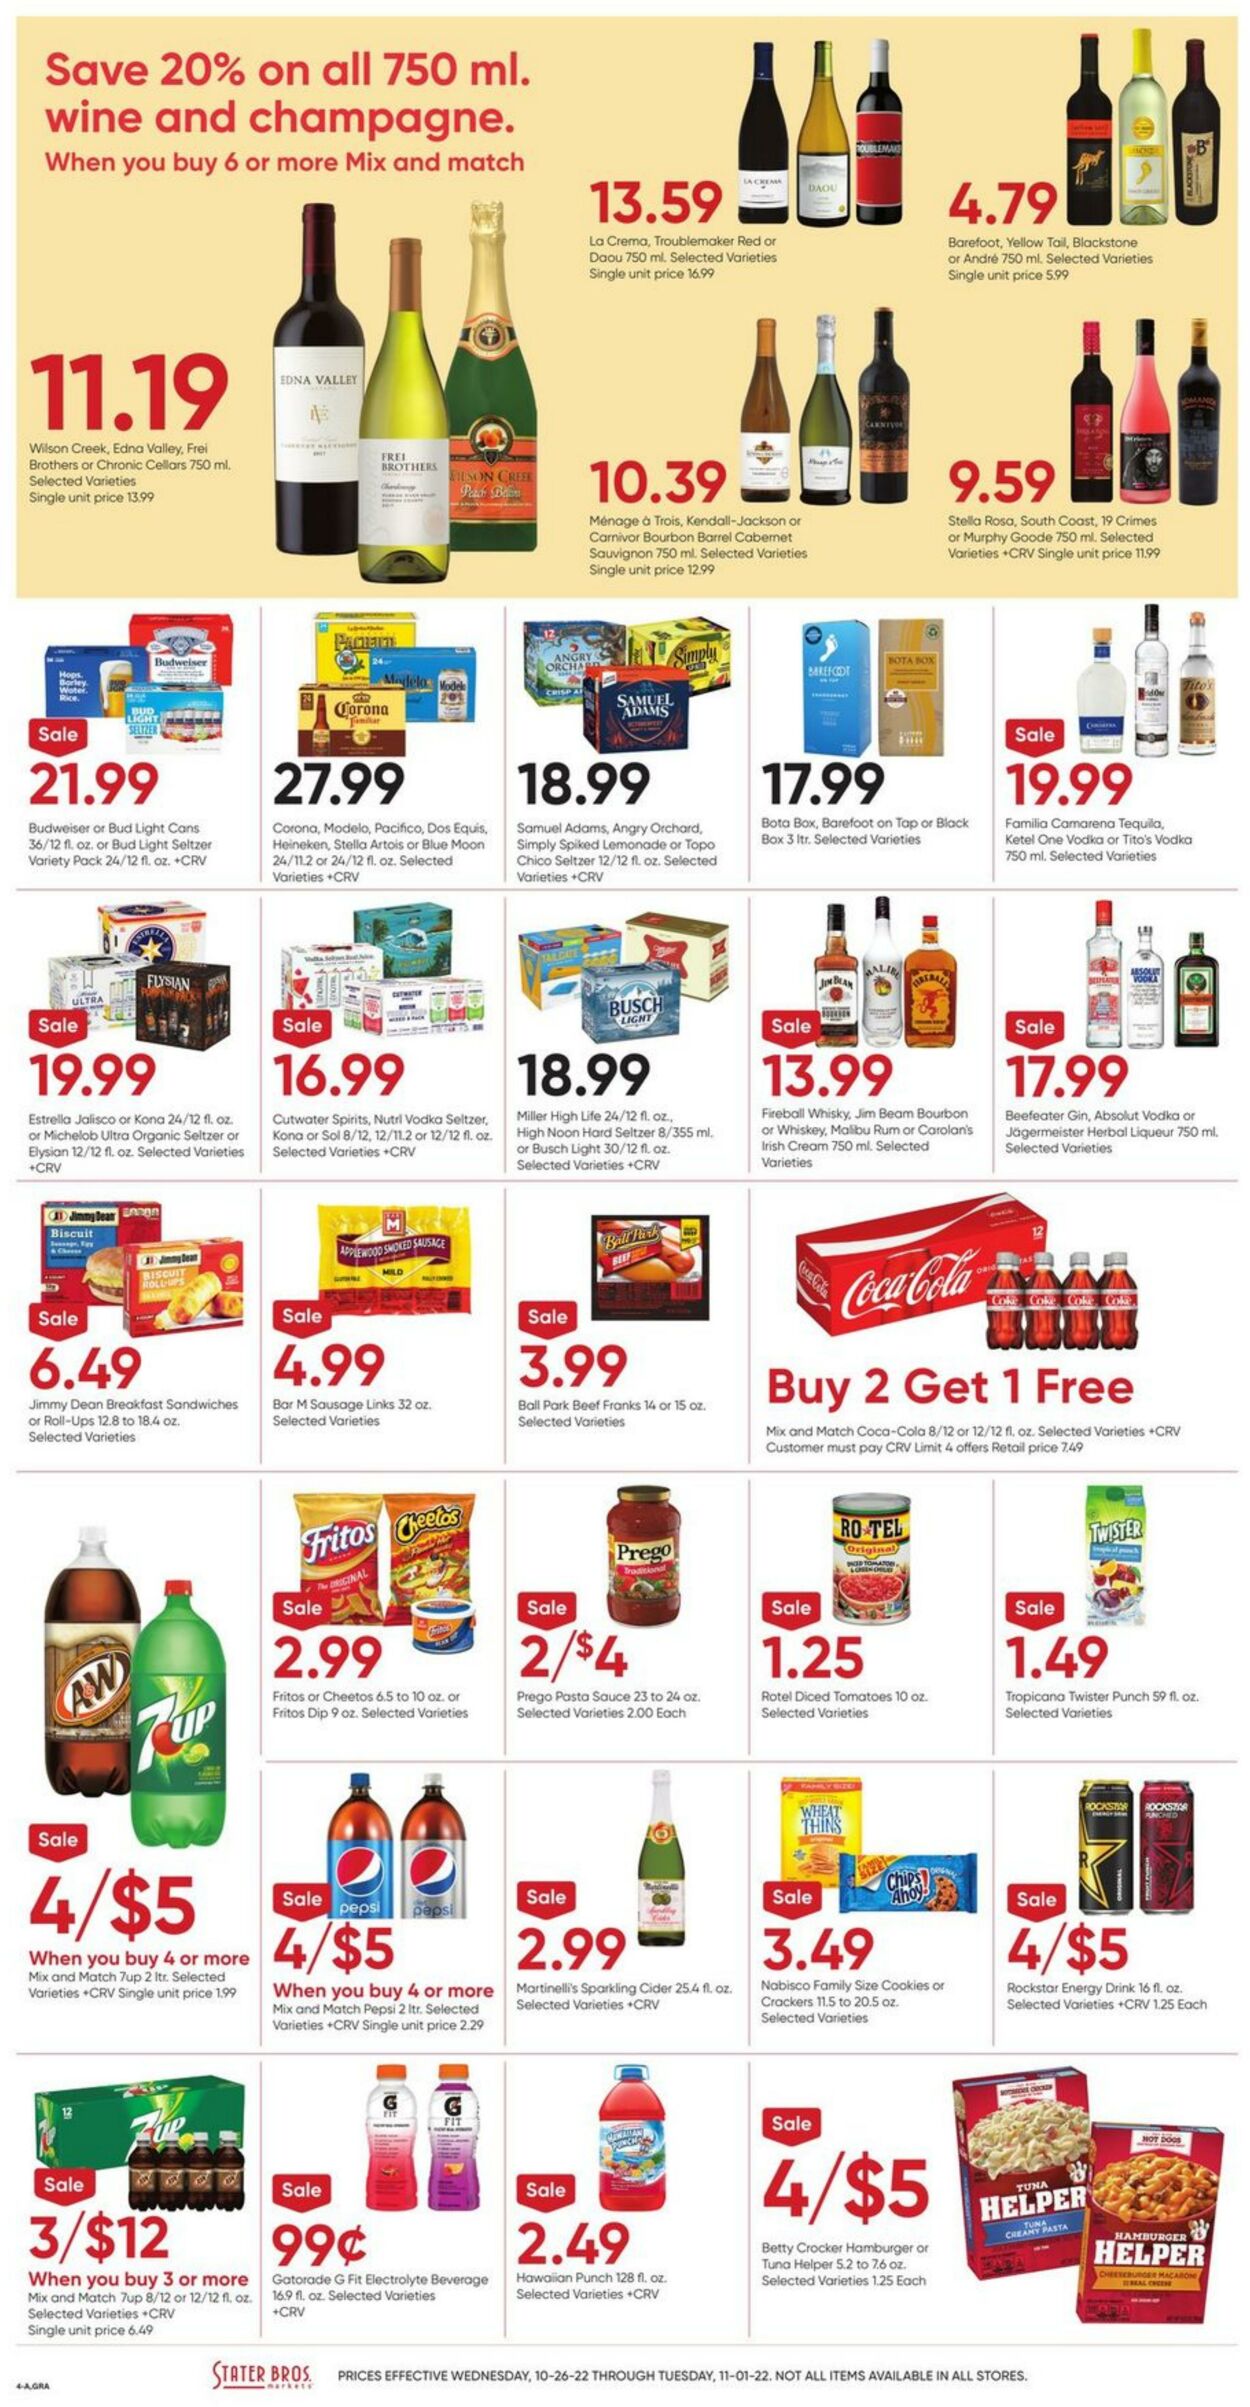 Weekly ad Stater Bros 10/26/2022 - 11/01/2022